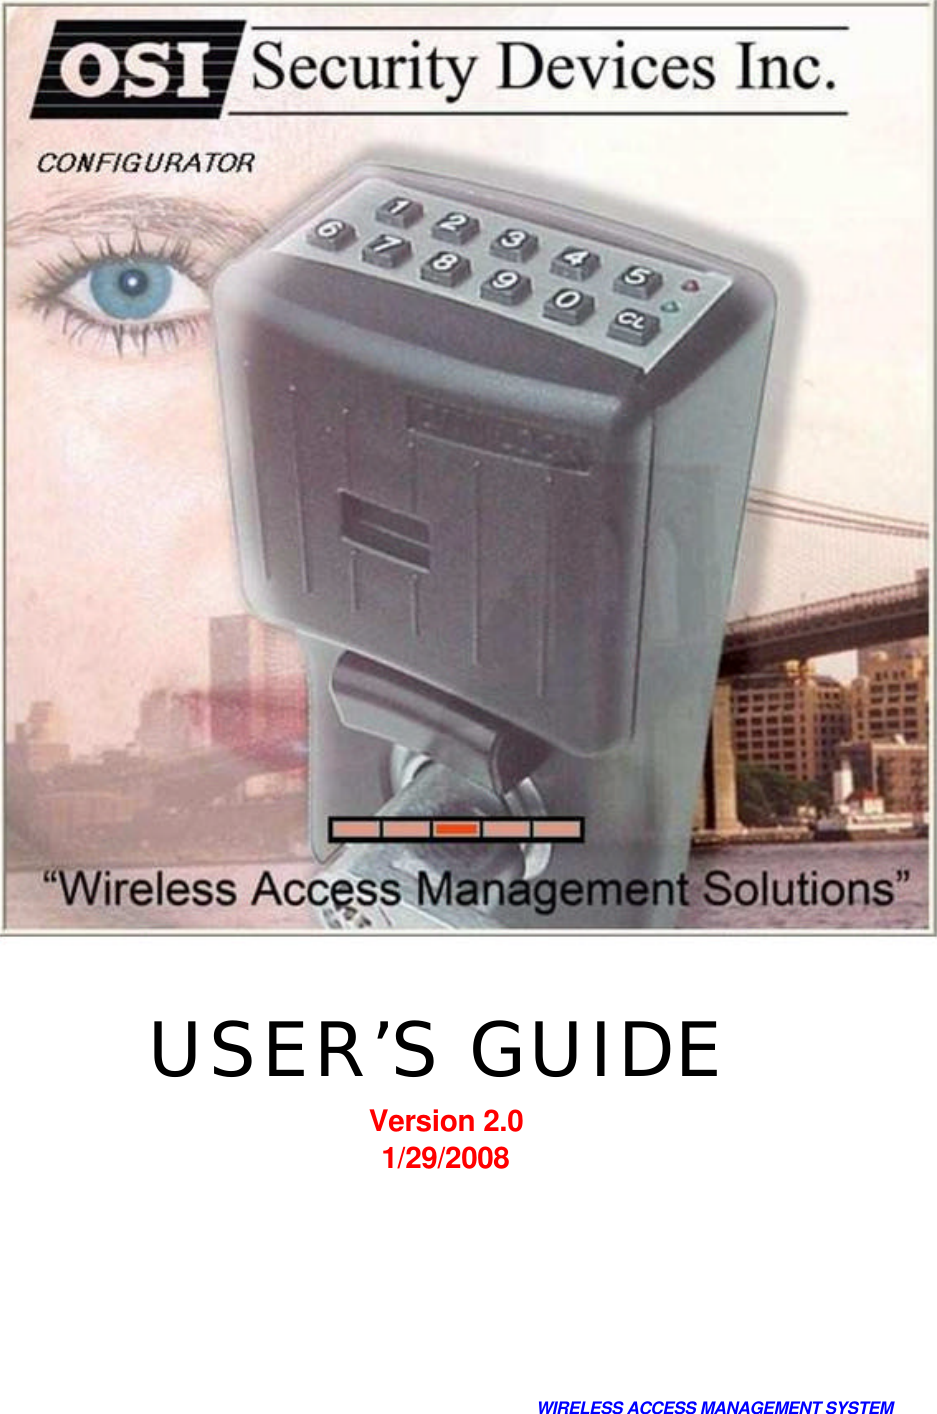              USER’S GUIDE  Version 2.0  1/29/2008             WIRELESS ACCESS MANAGEMENT SYSTEM  